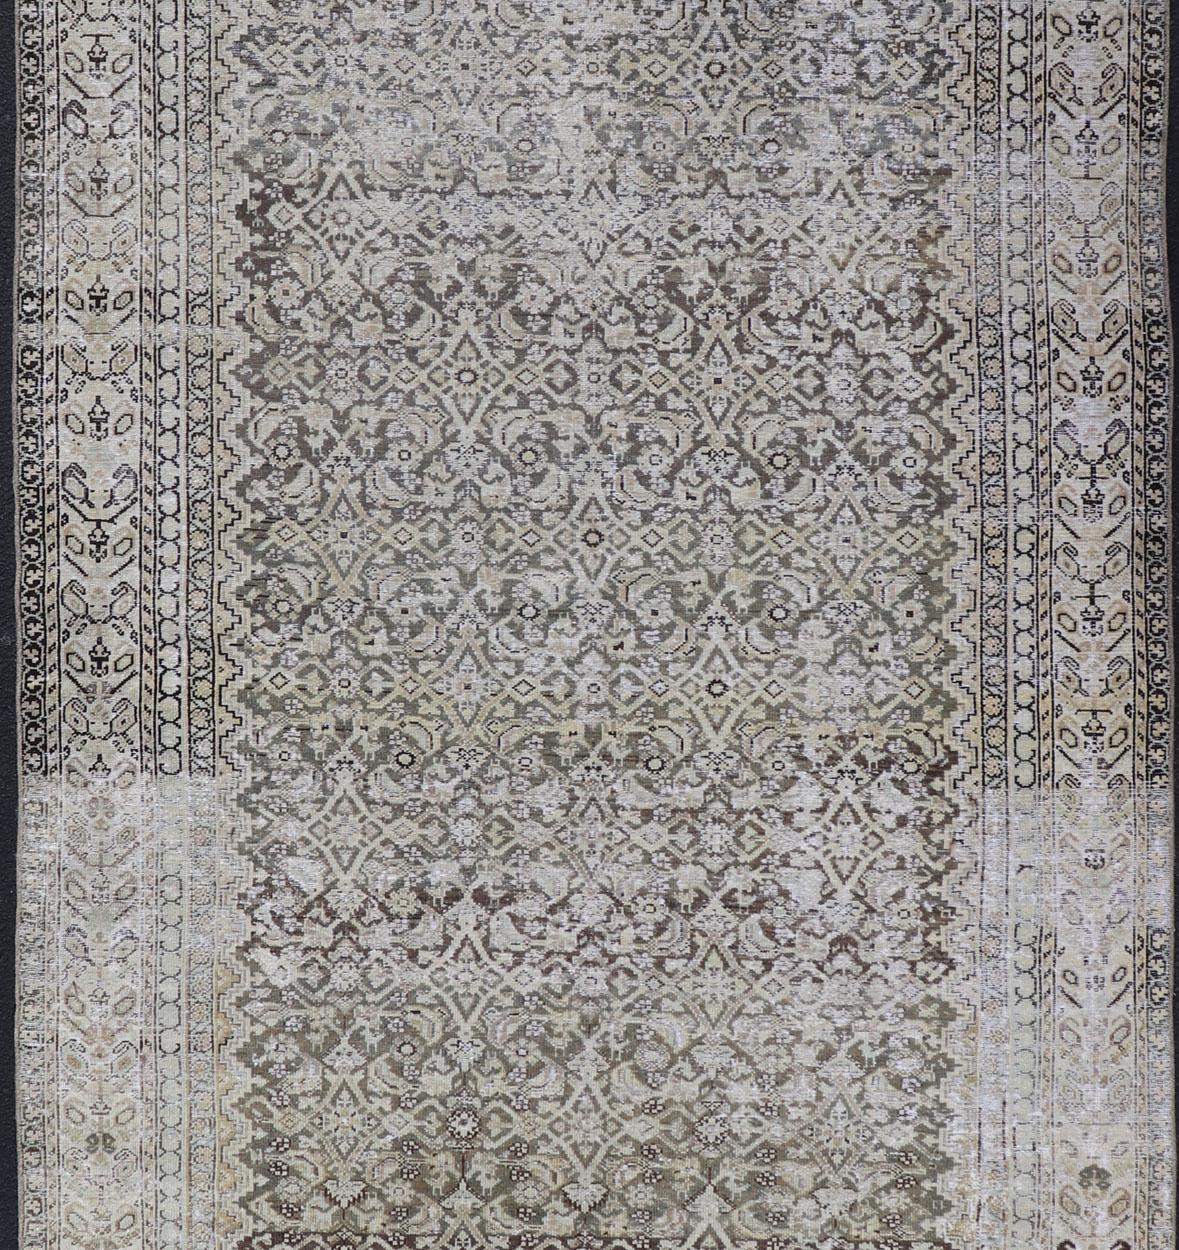 All-over Herati motif design Persian distressed antique Malayer Gallery rug in tones of gray, charcoal and neutrals rug SUS-2012-272, country of origin / type: Iran / Malayer, circa 1910.

This beautiful distressed antique early 20th century